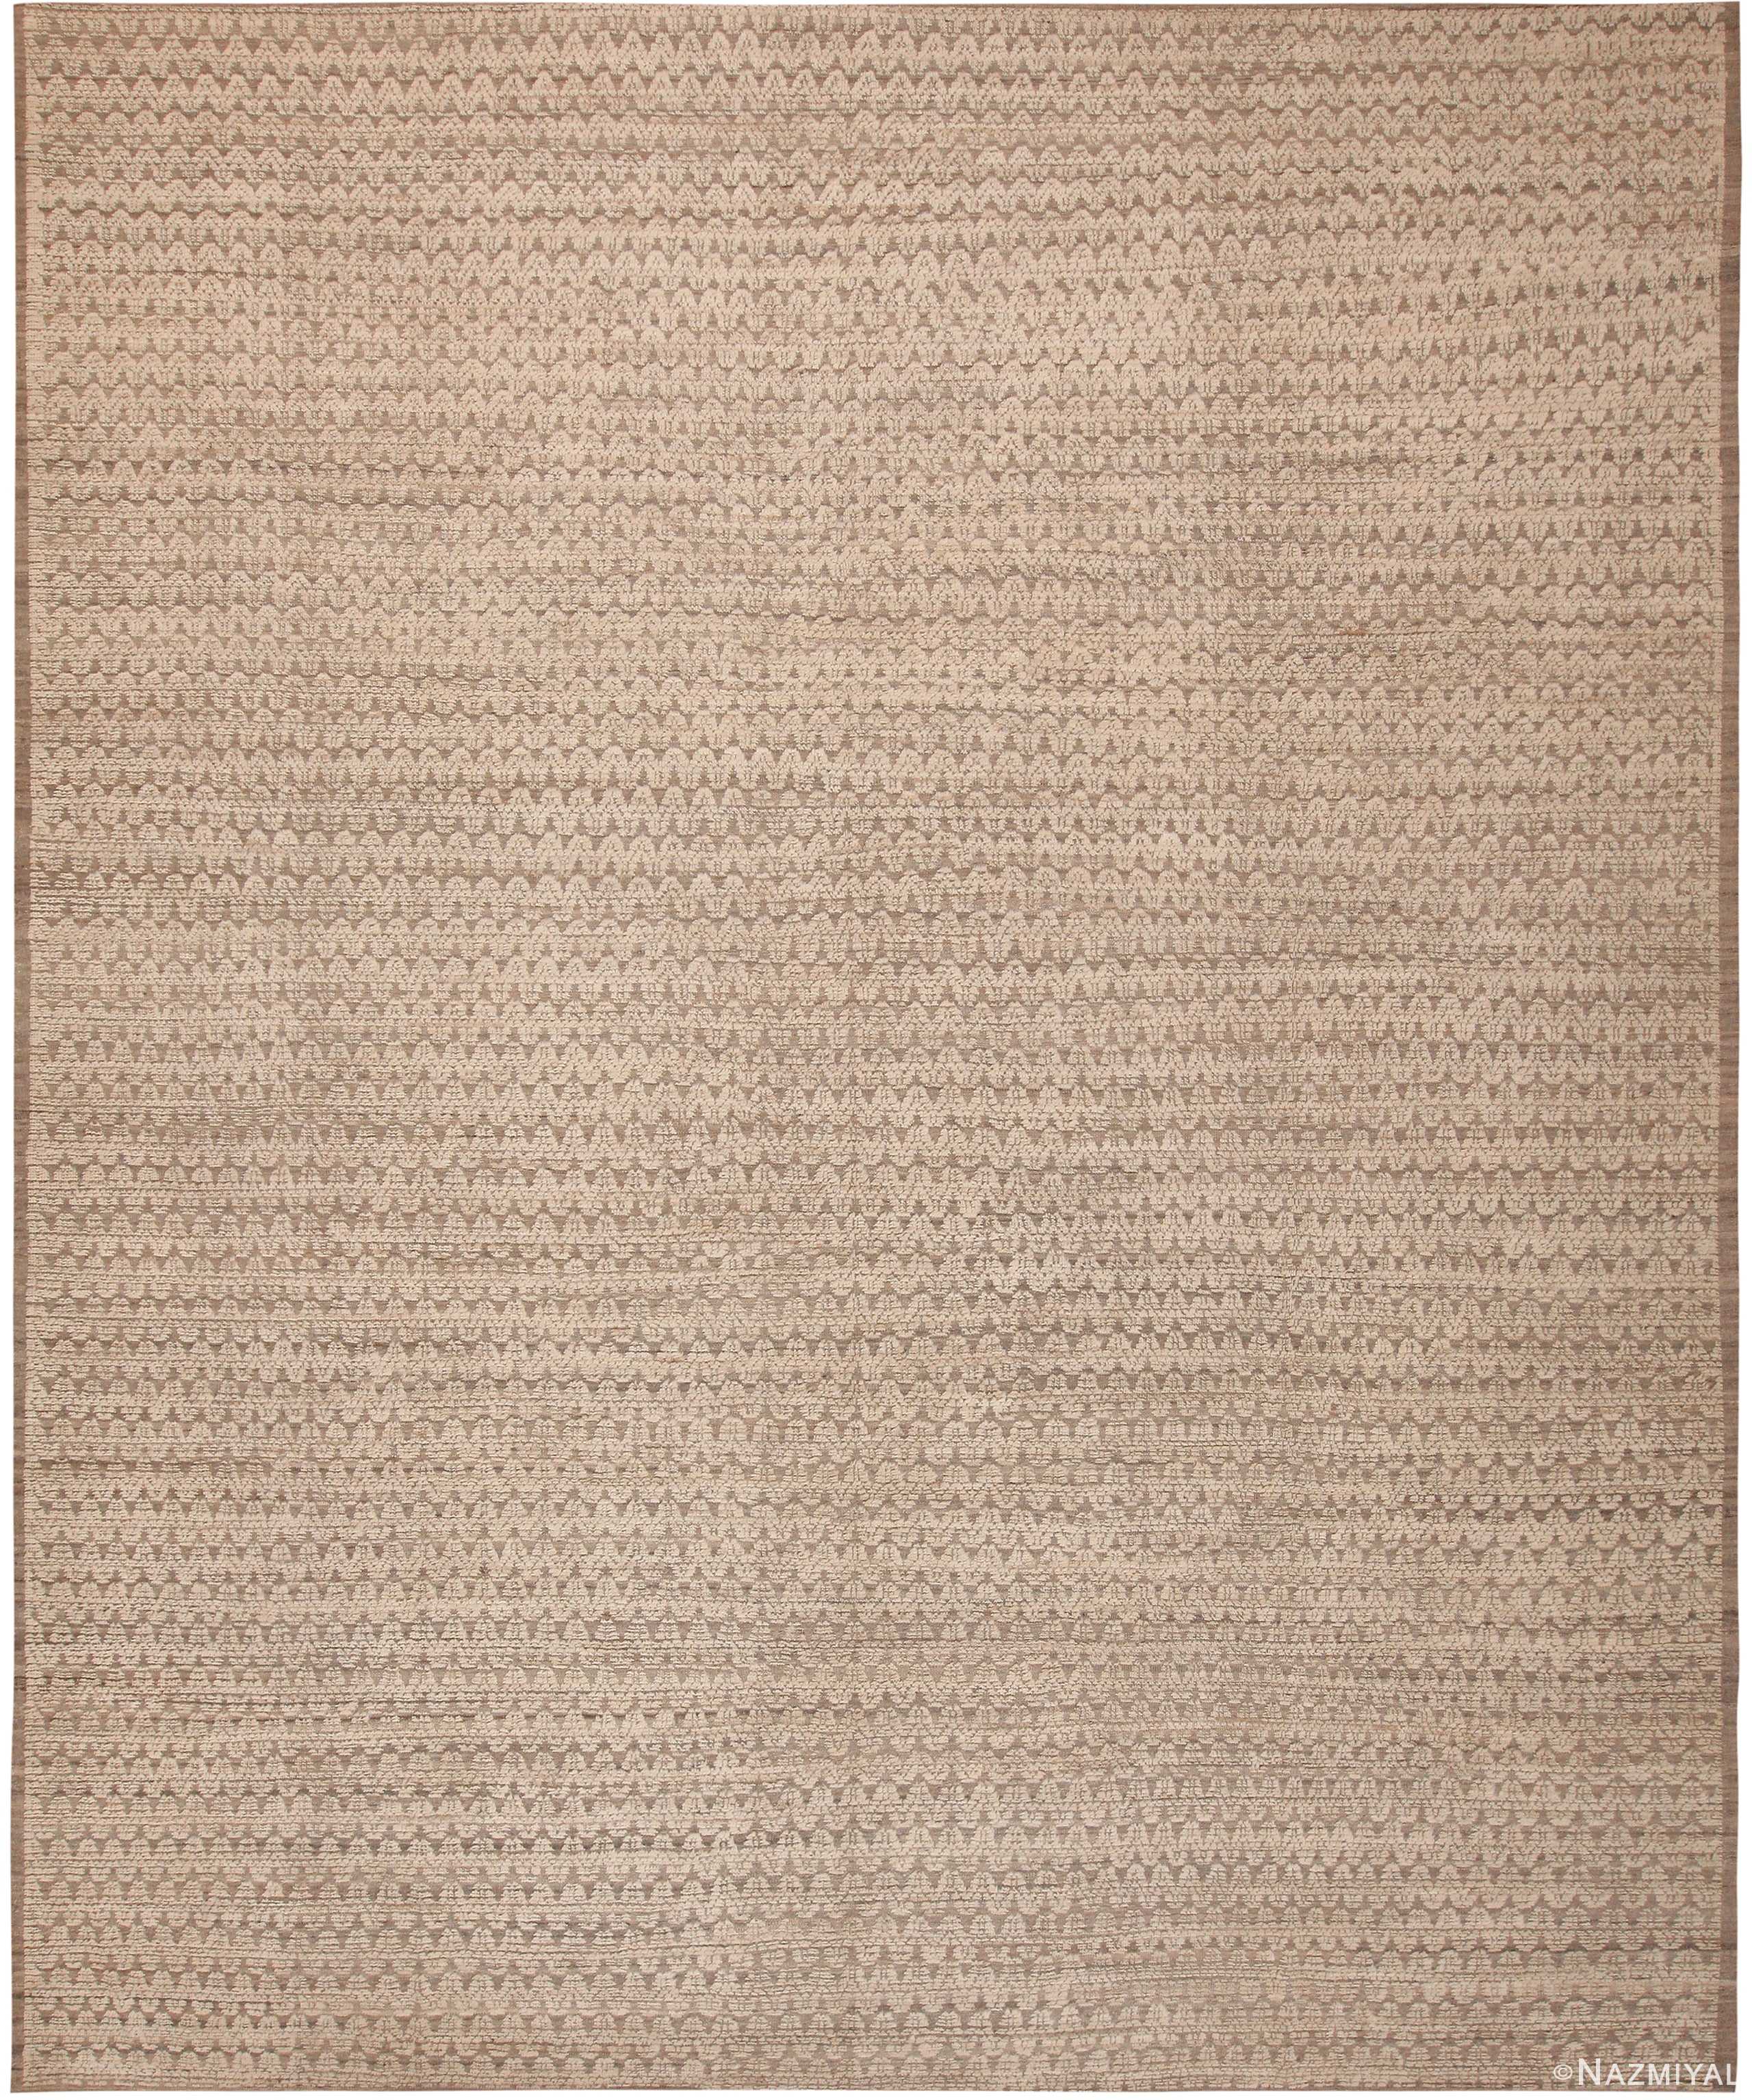 Soft Decorative Modern Moroccan Rug 61006 by Nazmiyal Antique Rugs